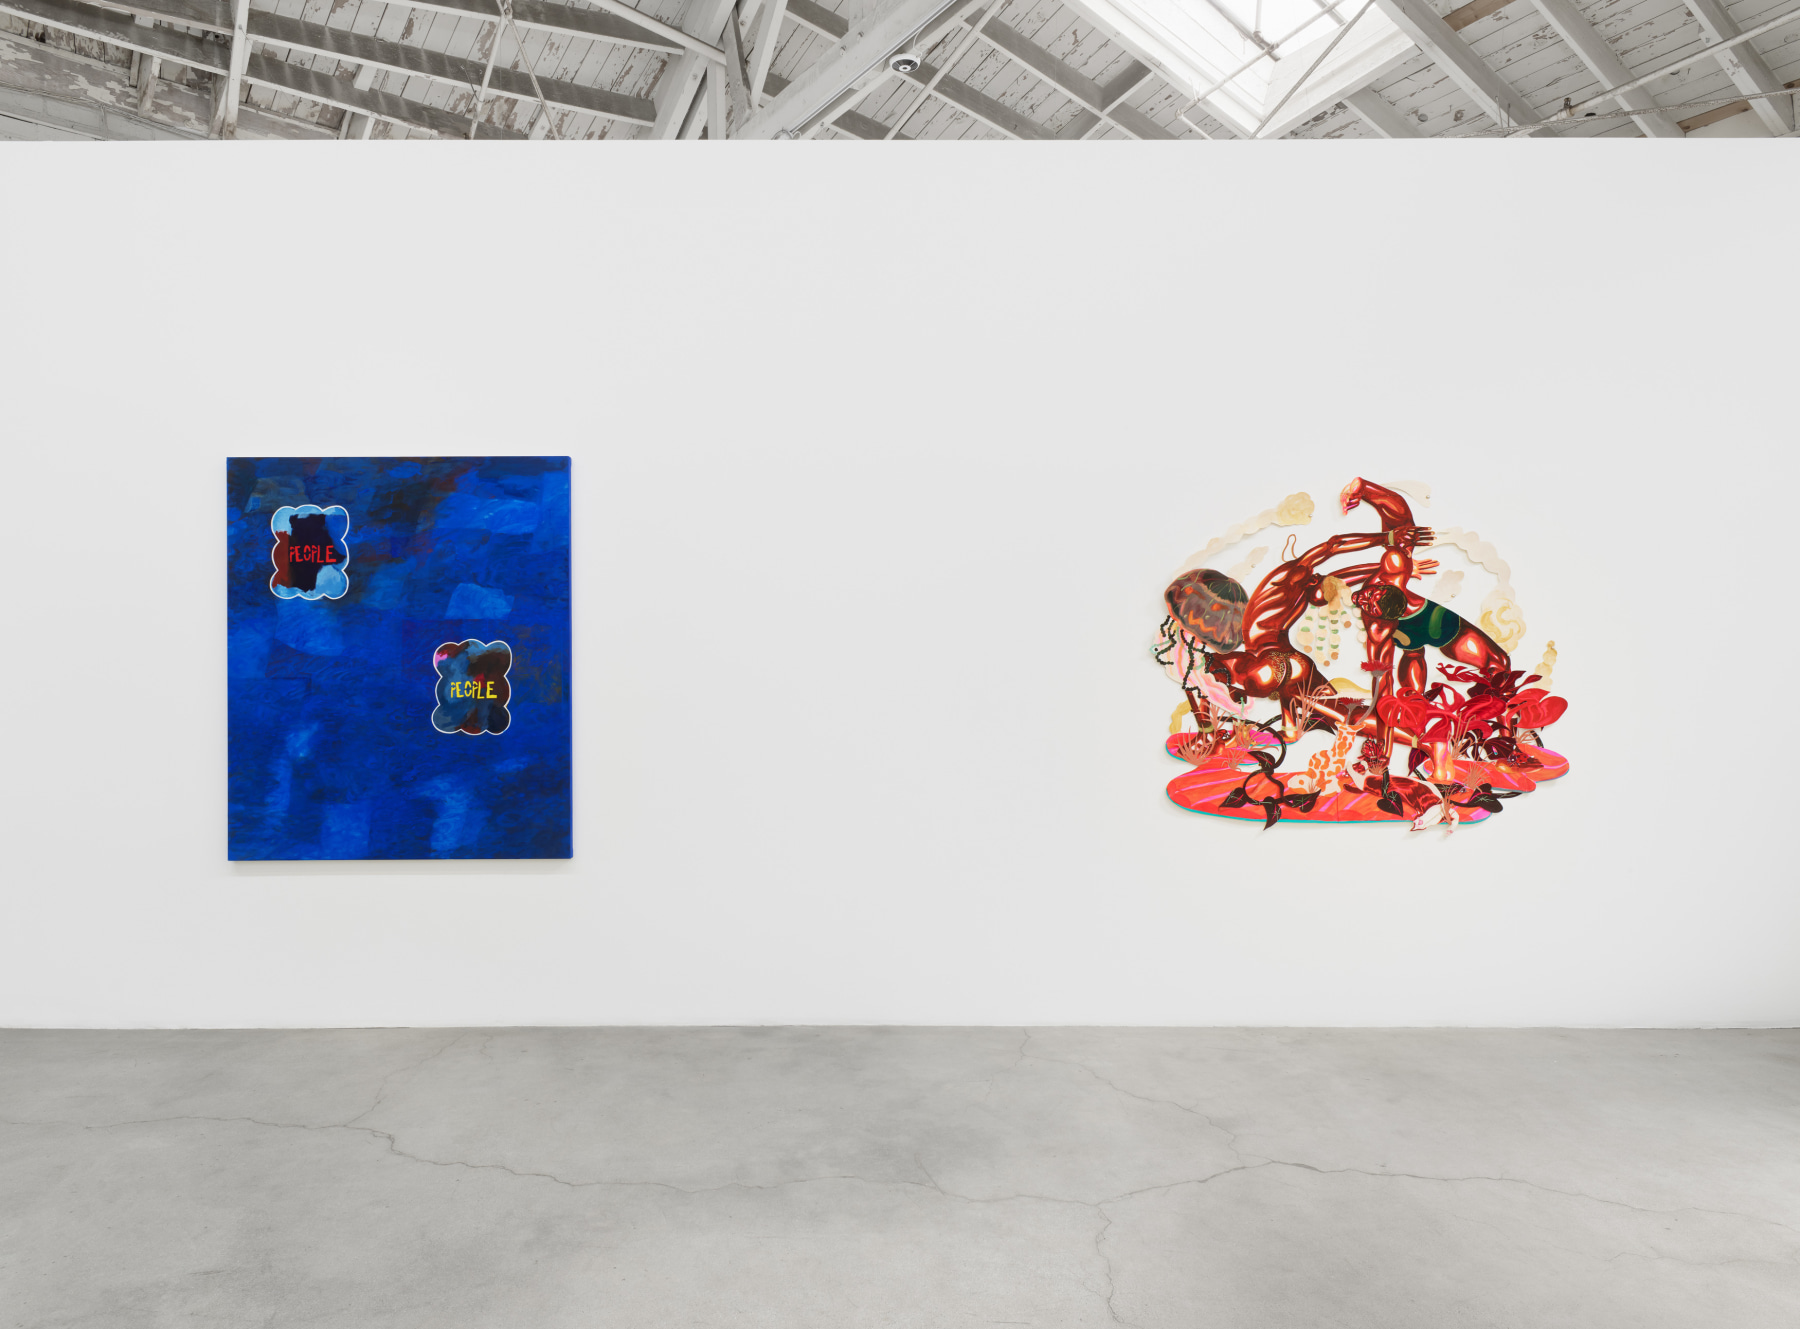 Installation view of Majeure Force, Part Two, featuring works by Marisa Takal and Khari Johnson-Ricks.